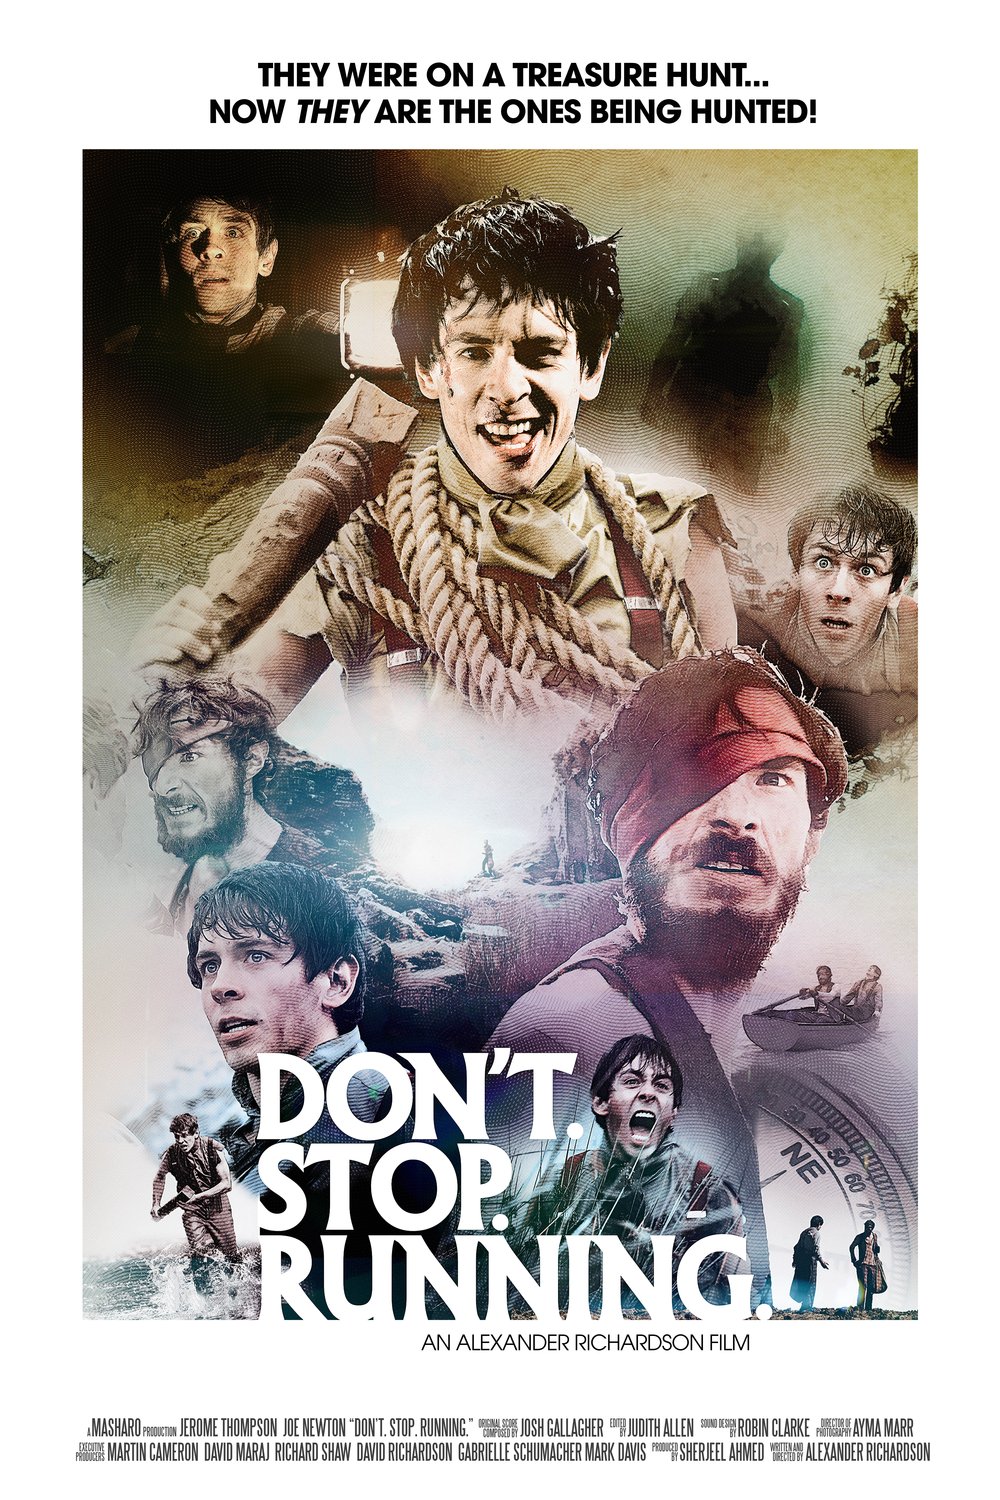 Poster of the movie Don't. Stop. Running.